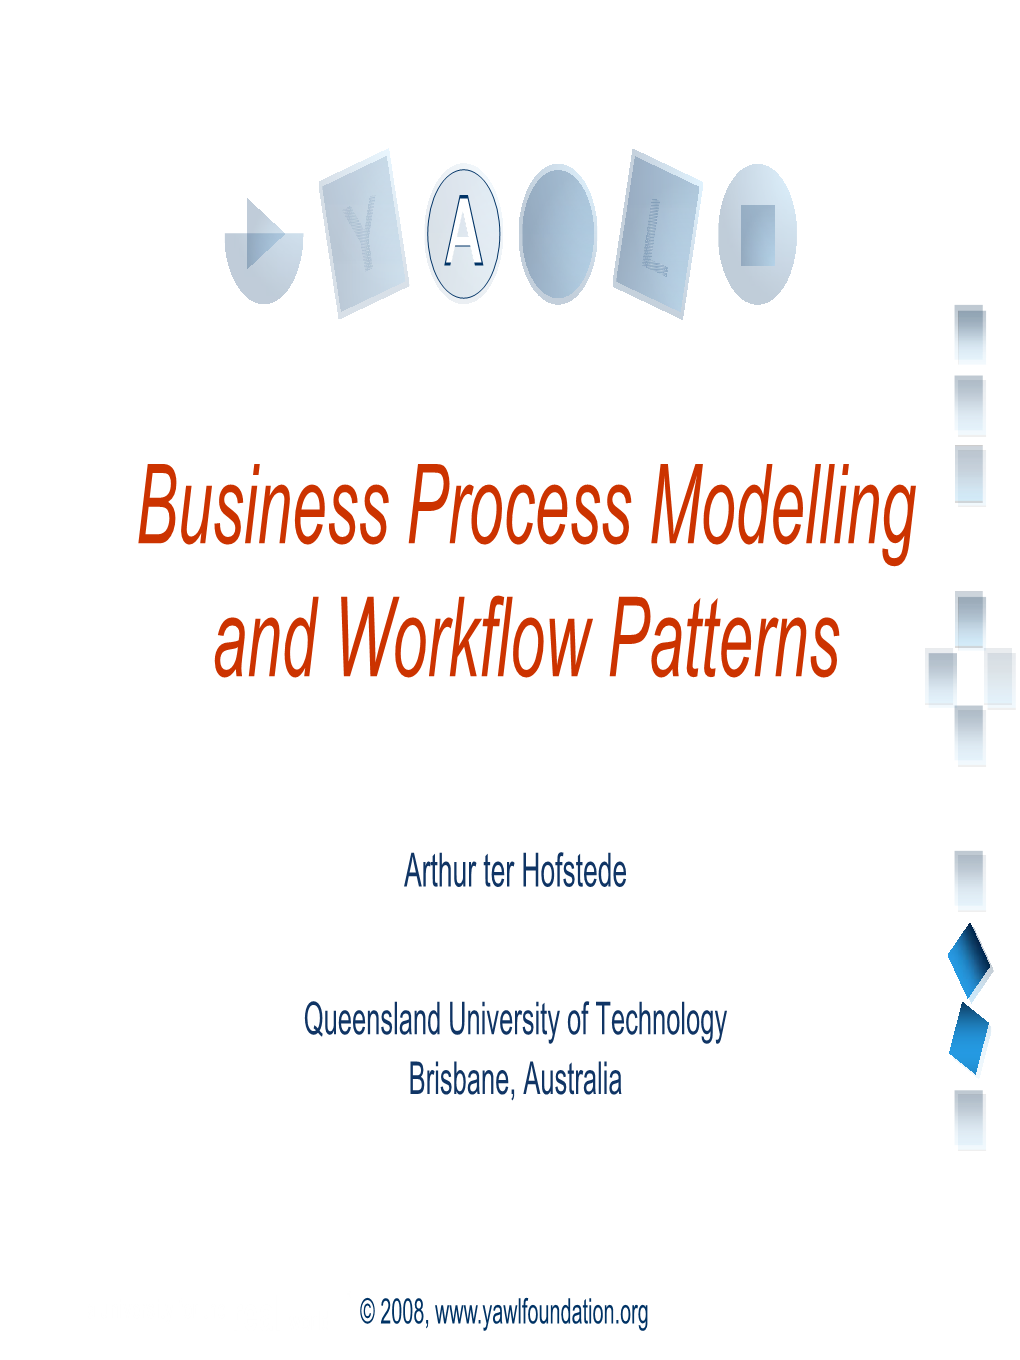 Business Process Modelling and Workflow Patterns